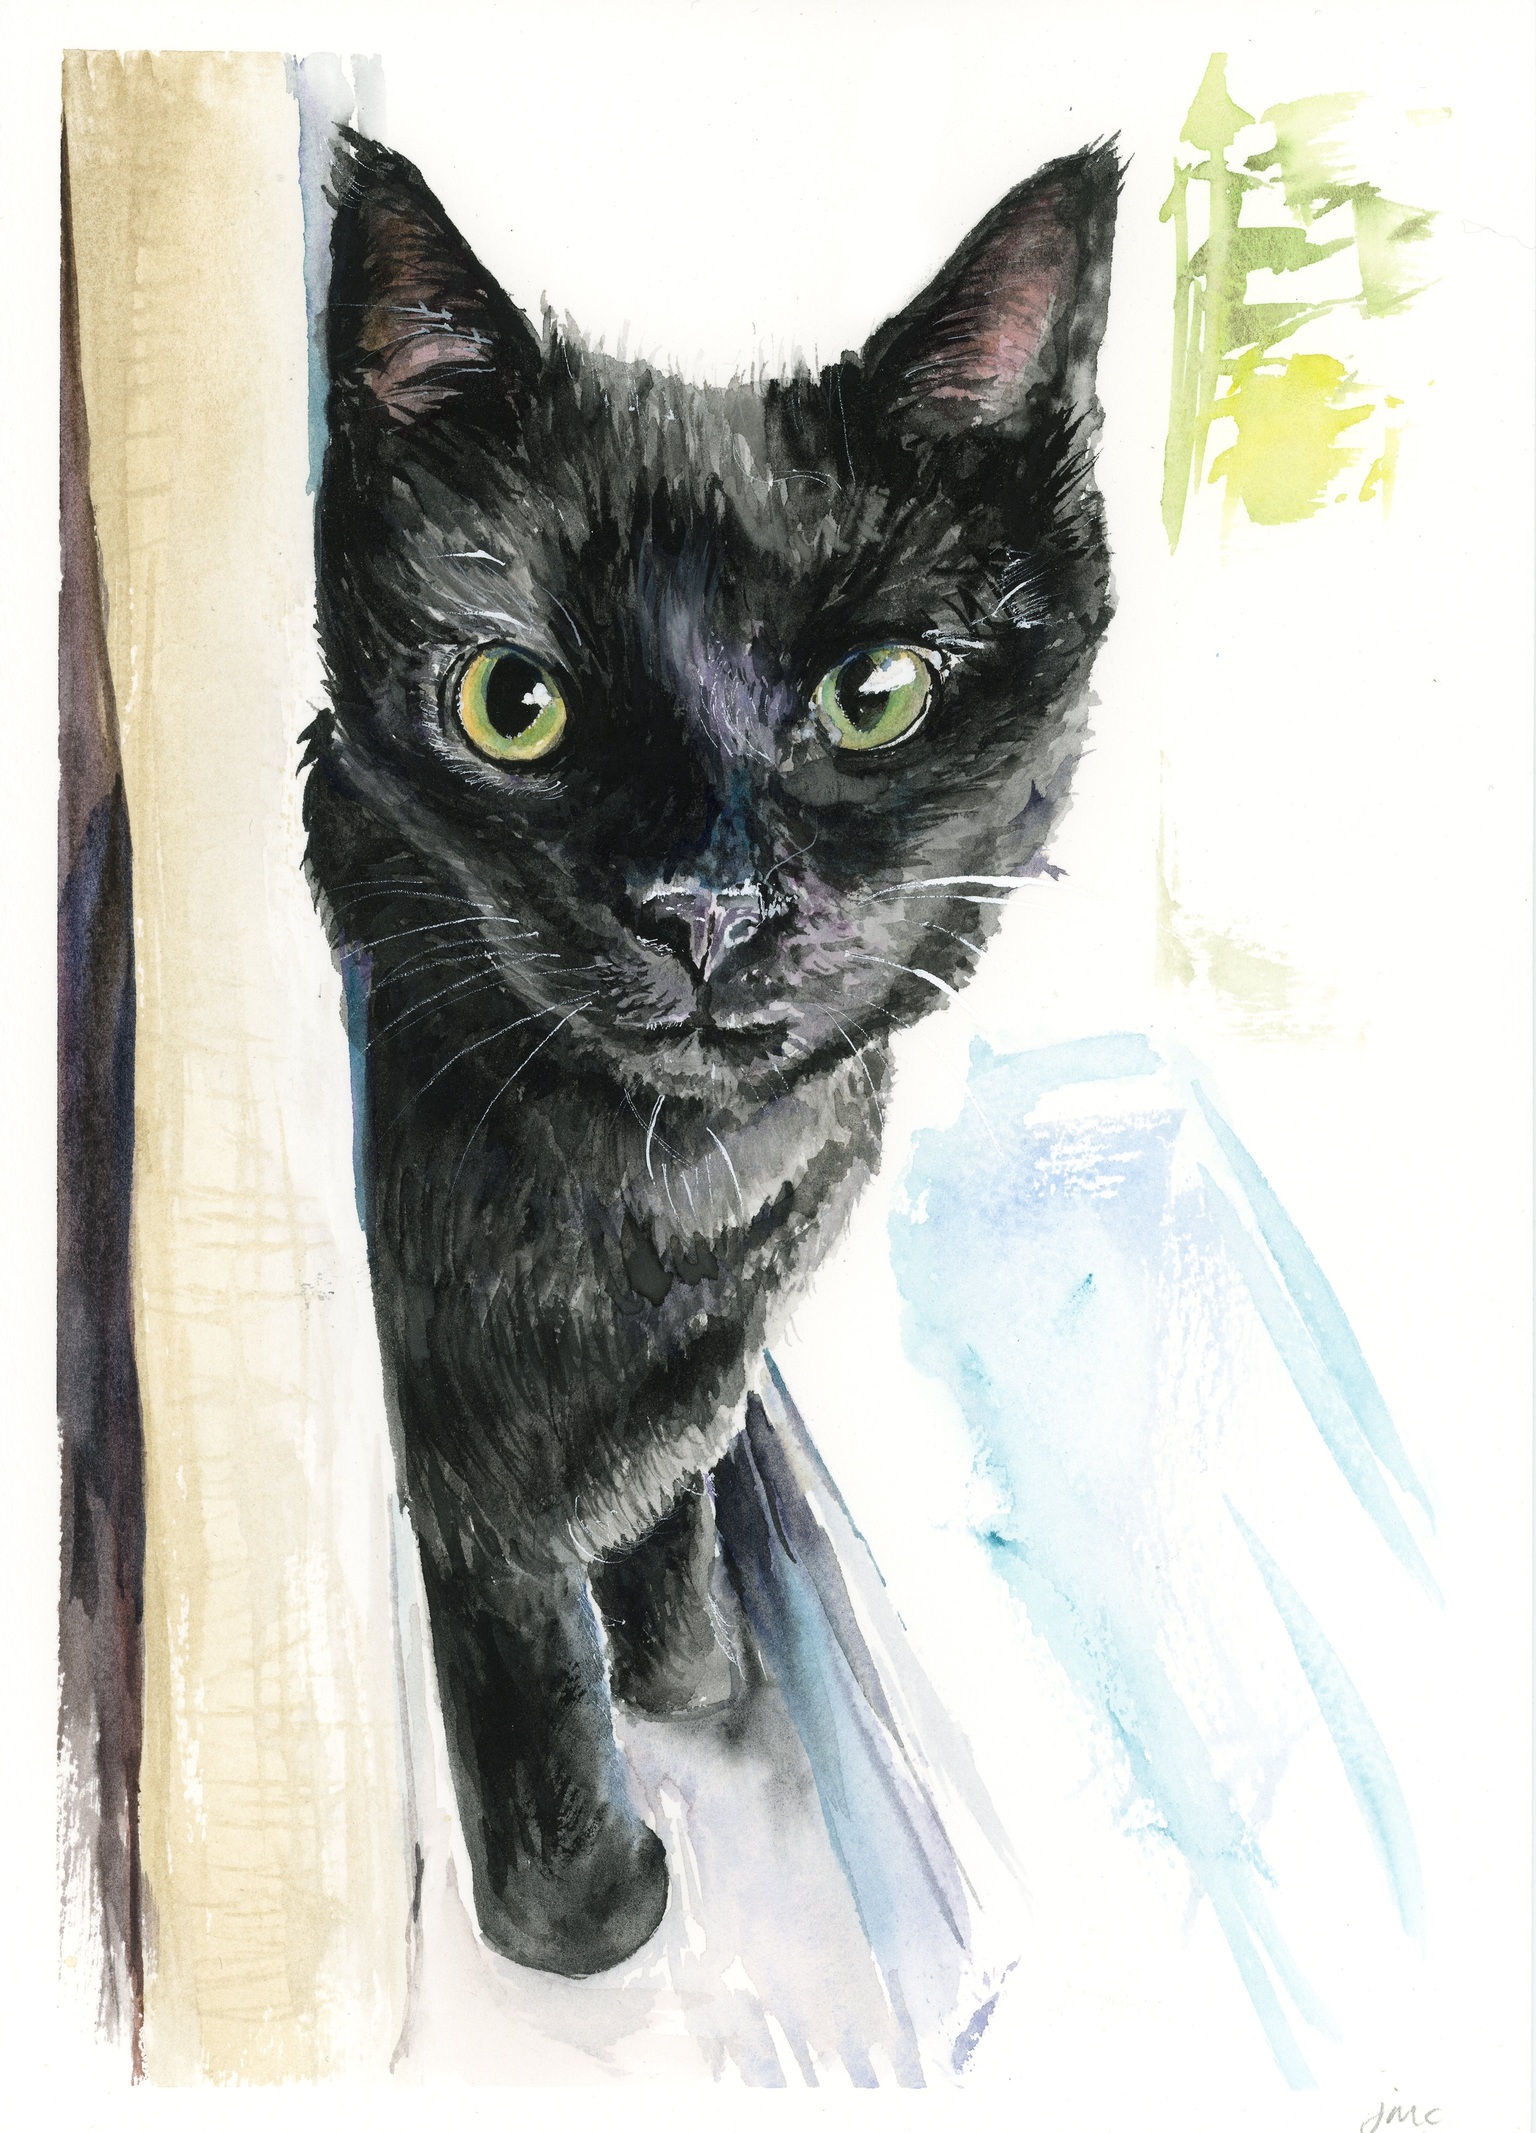 Watercolour painting of a black cat peeping around a beige curtain on a windowsill